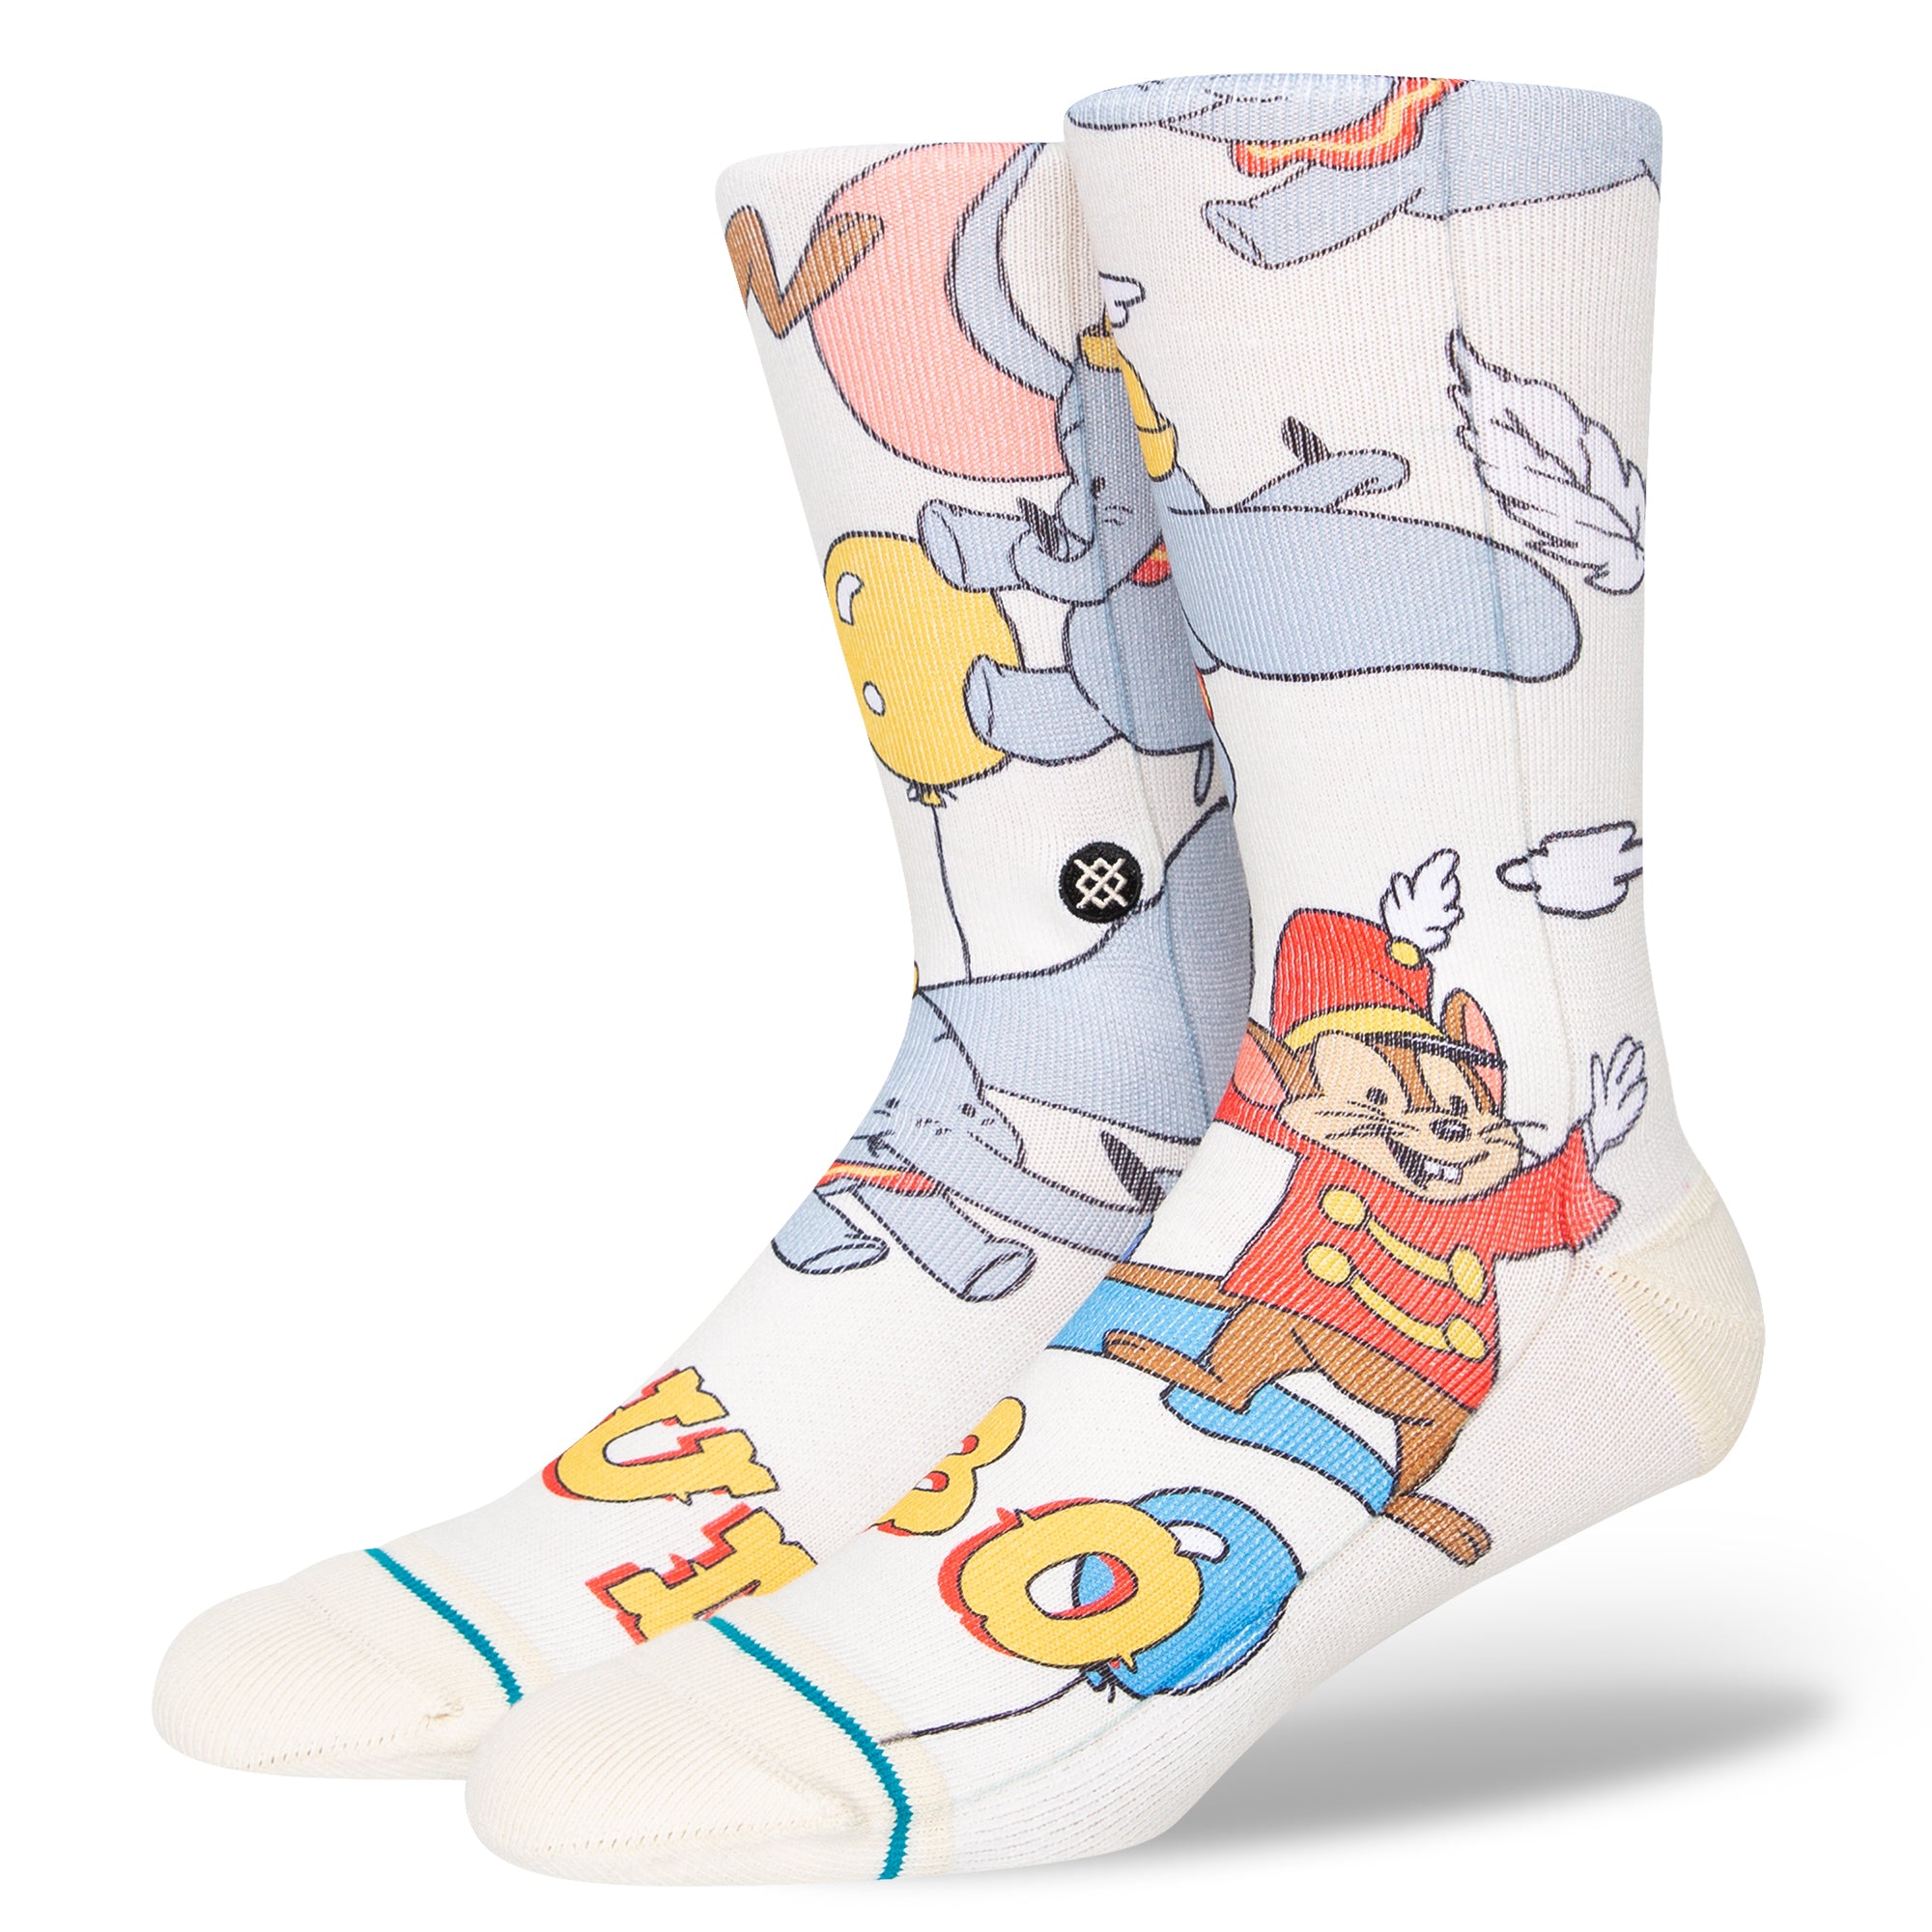 Dumbo (By Travis) - Off White